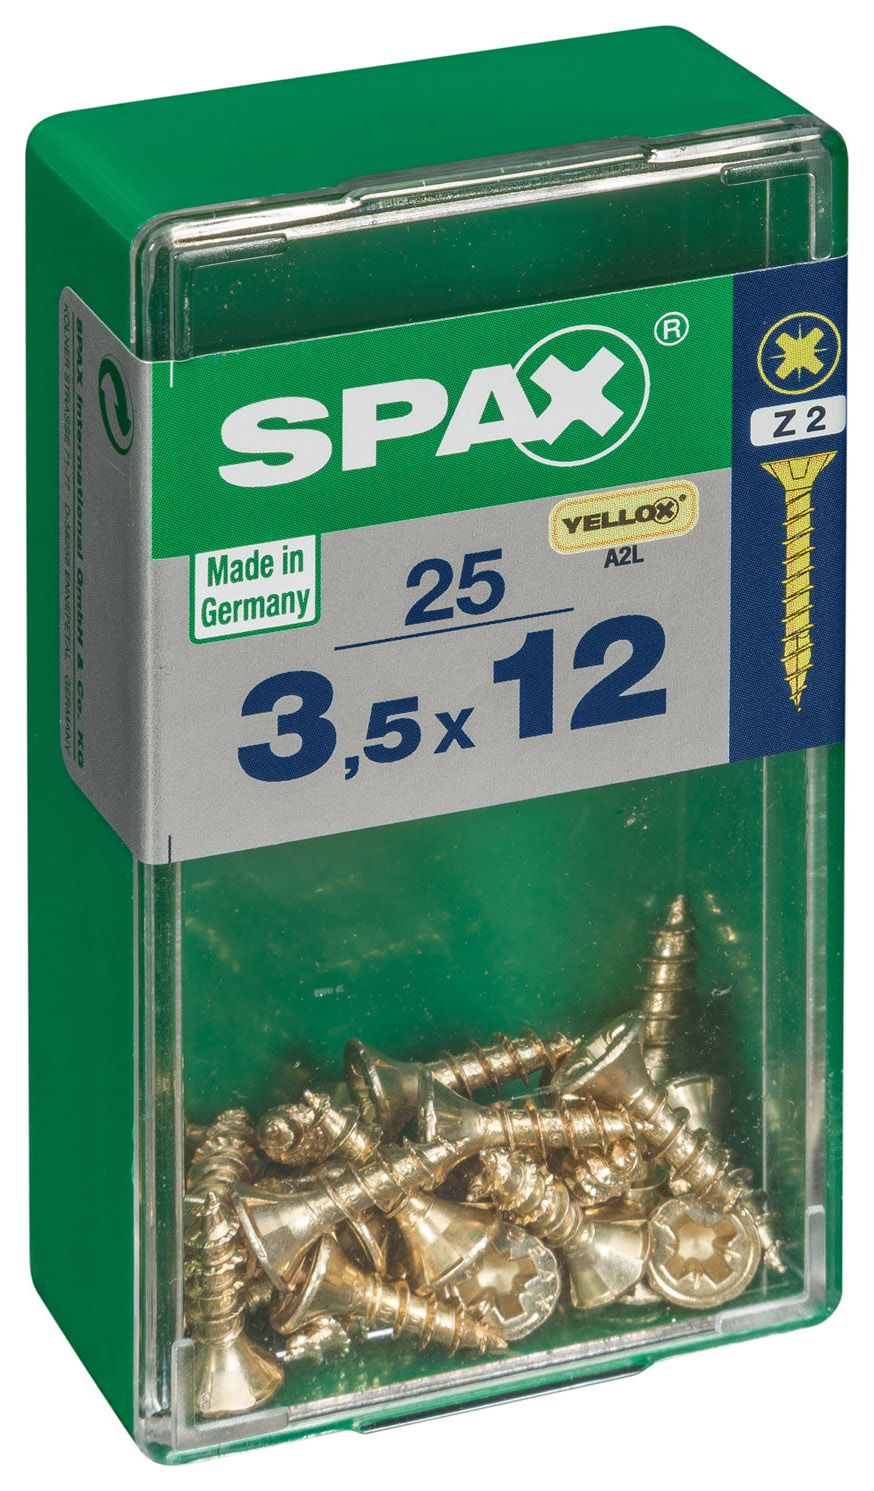 Image of Spax PZ Countersunk Zinc Yellow Screws - 3.5 x 12mm Pack of 25